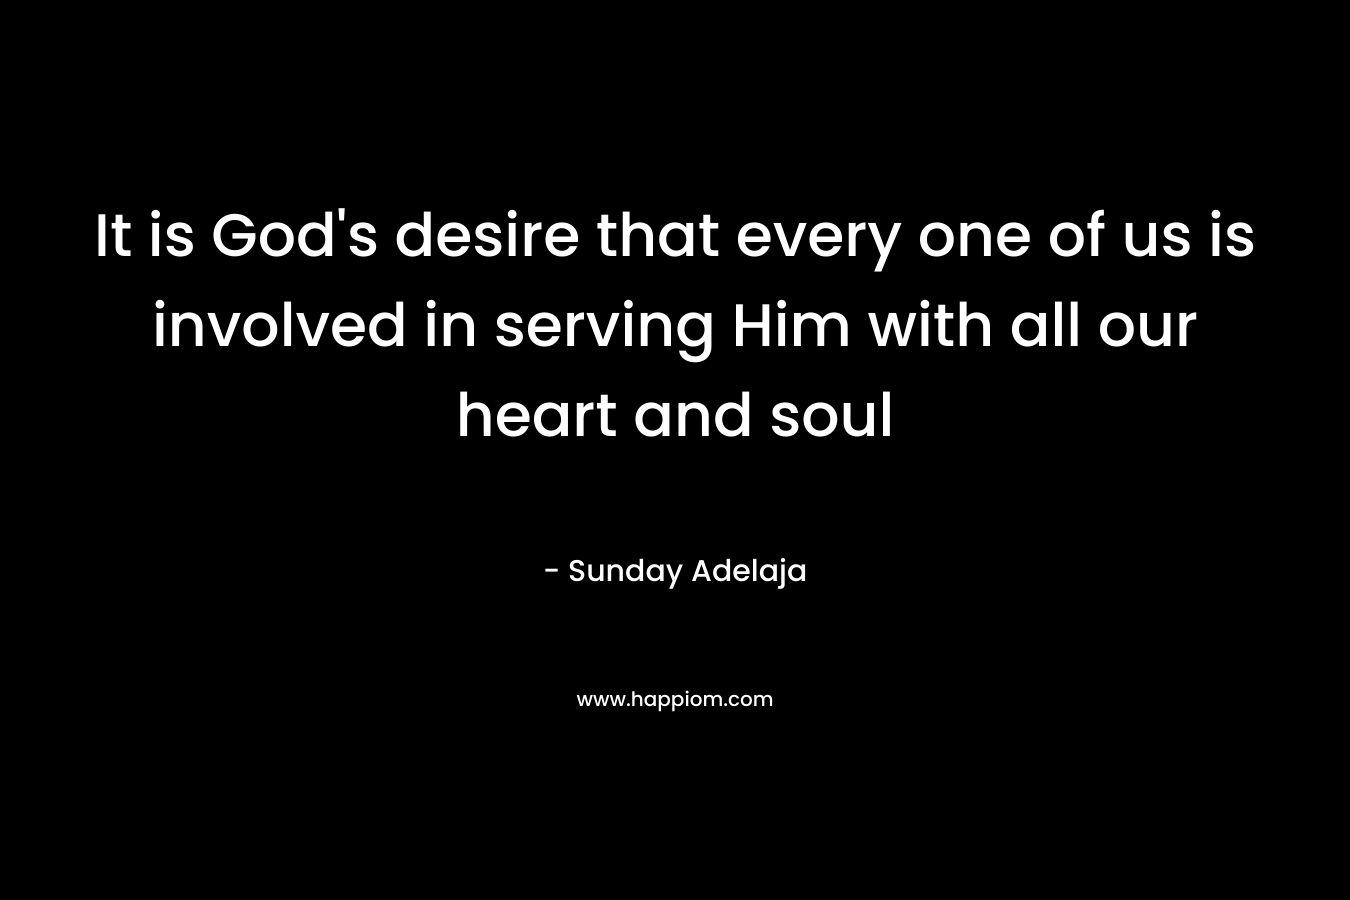 It is God's desire that every one of us is involved in serving Him with all our heart and soul